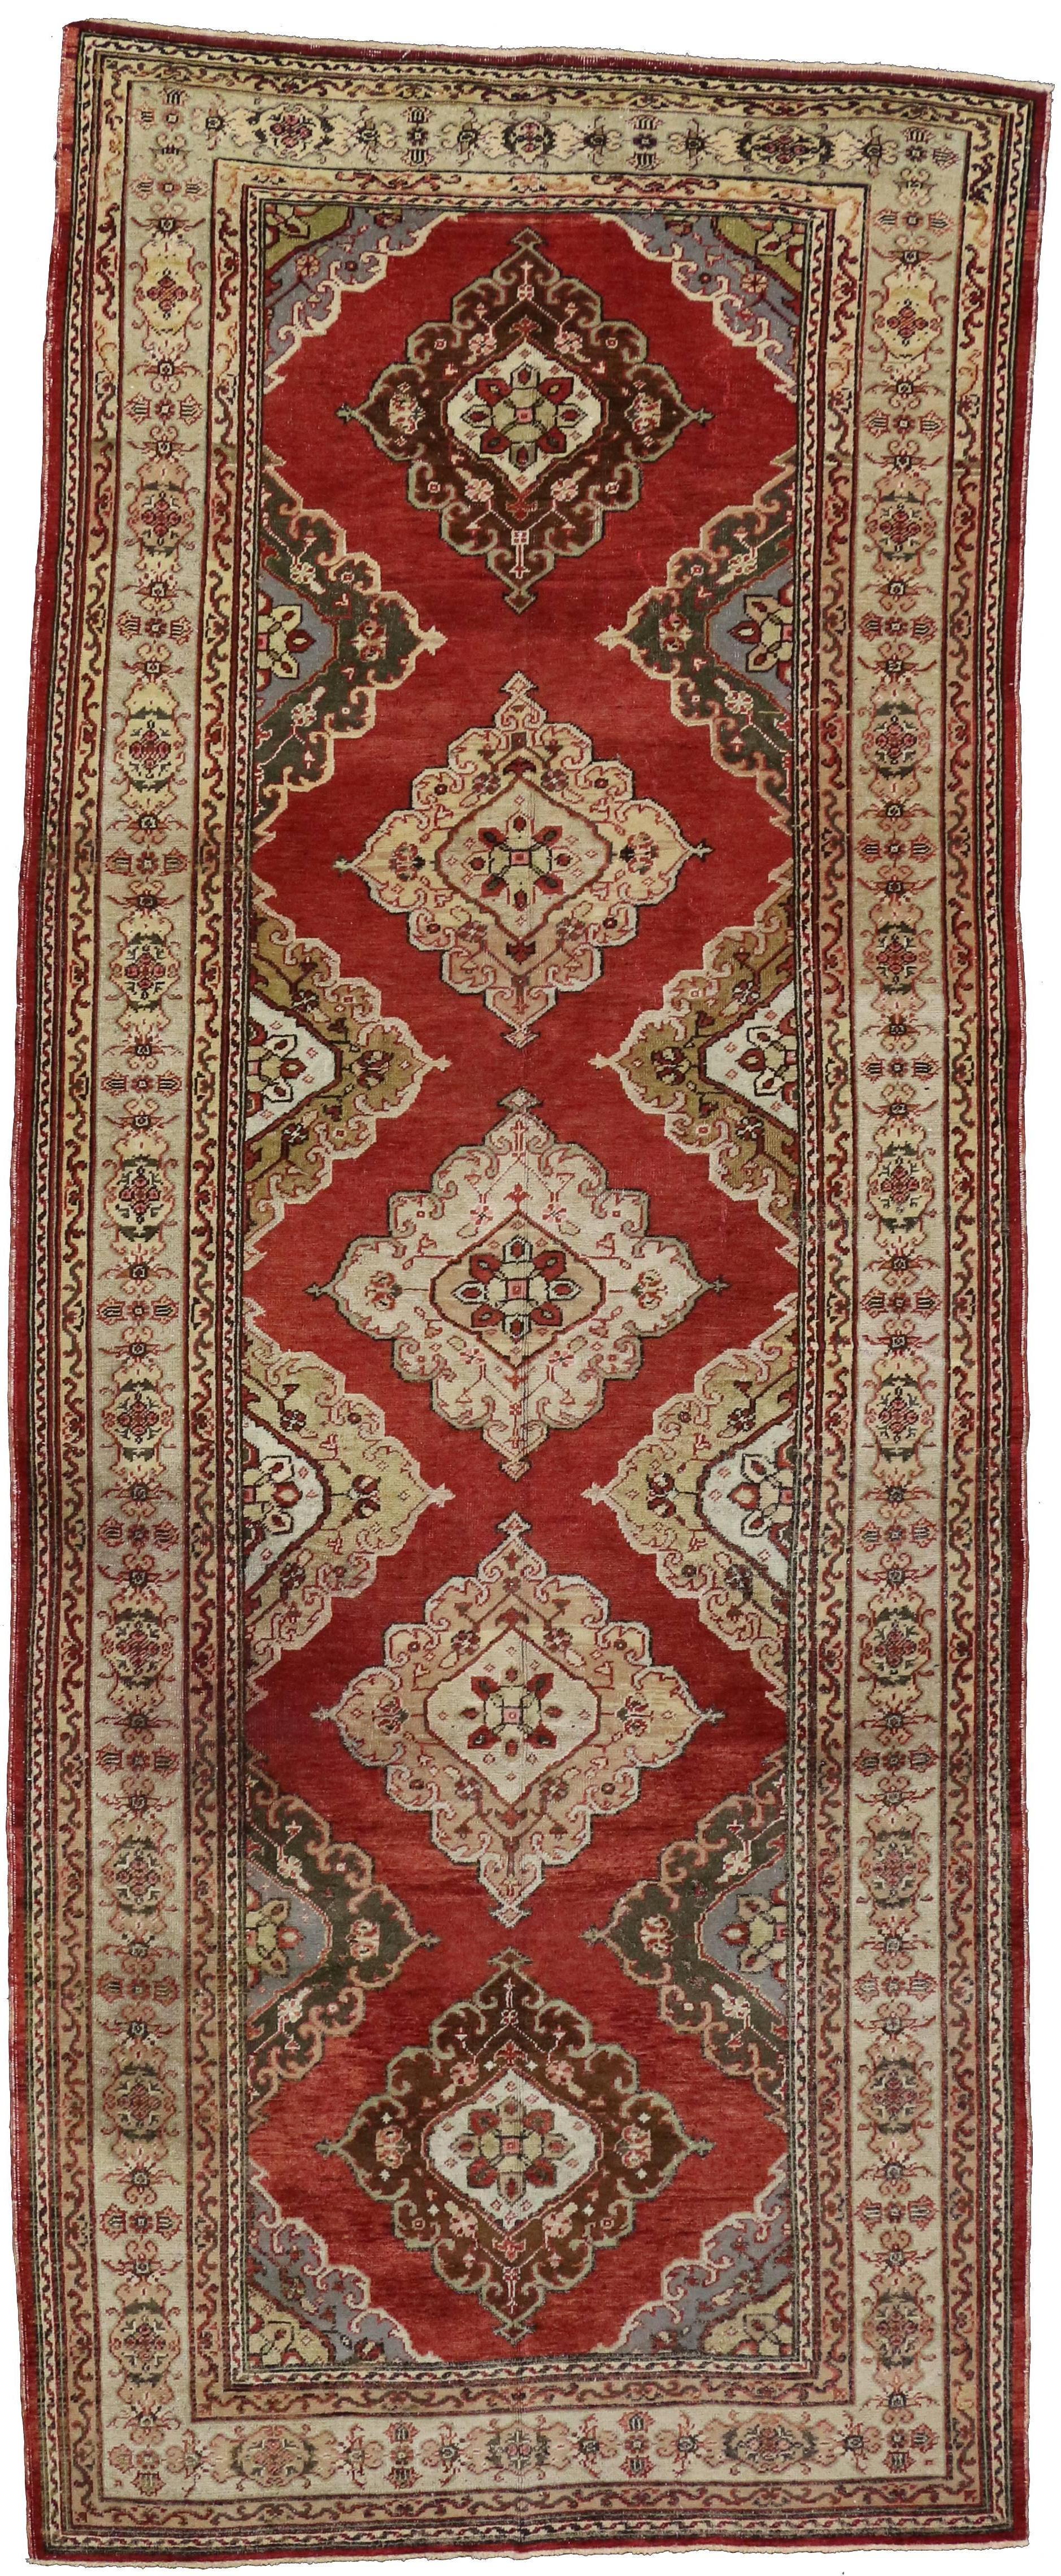 50588-50589 Pair of Vintage Turkish Oushak Carpet Runners with Traditional Modern Style. Remarkable in style and scale, this pair of vintage Turkish Oushak carpet runners feature a traditional modern style rendered in variegated shades of rust, red,